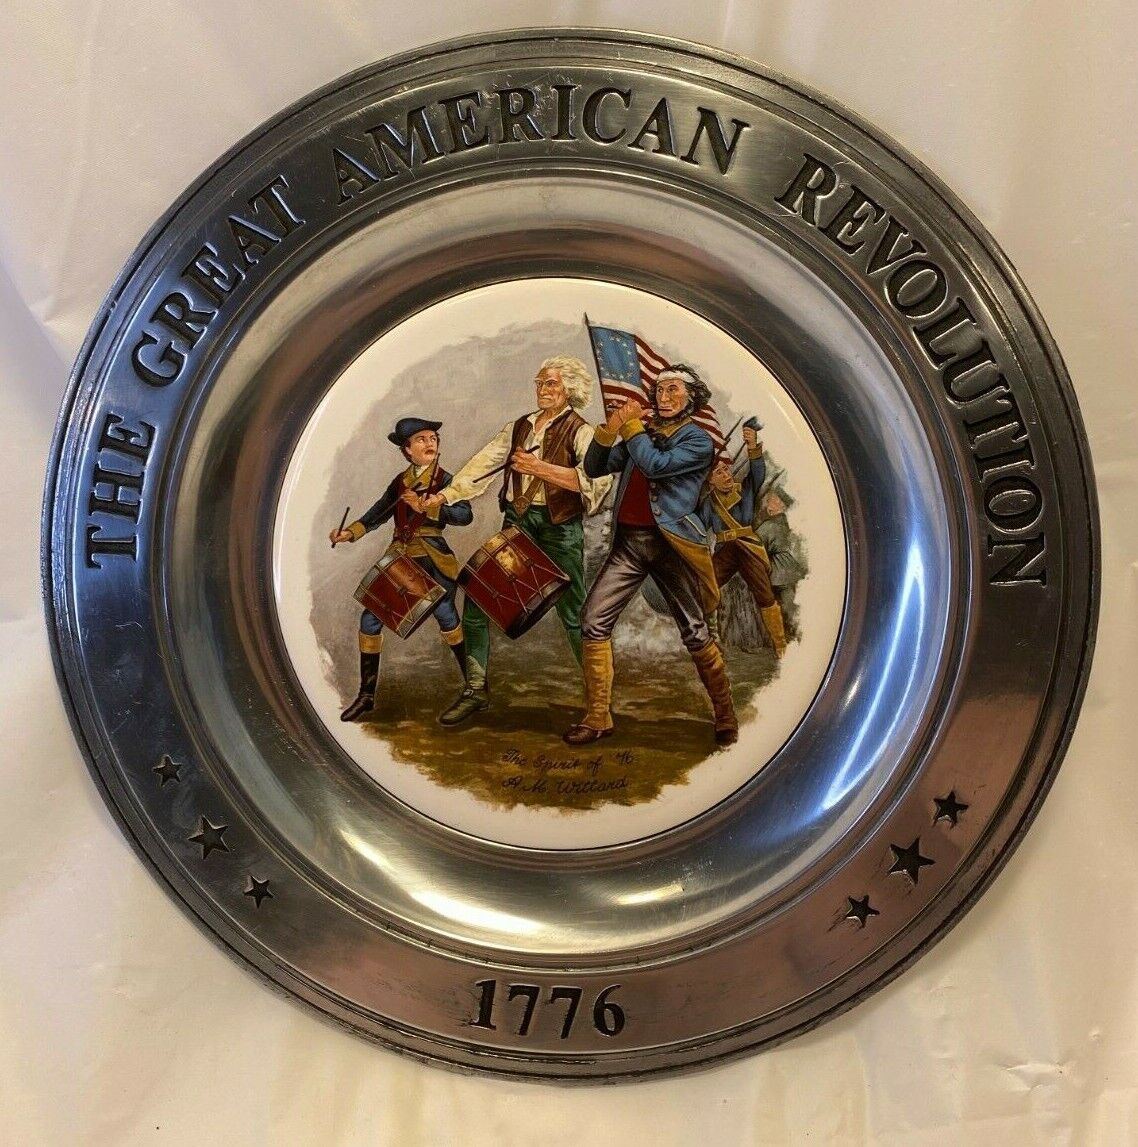 Great American Revolution 1776 Pewter Collector Plate Spirit of \'76 Canton OH 